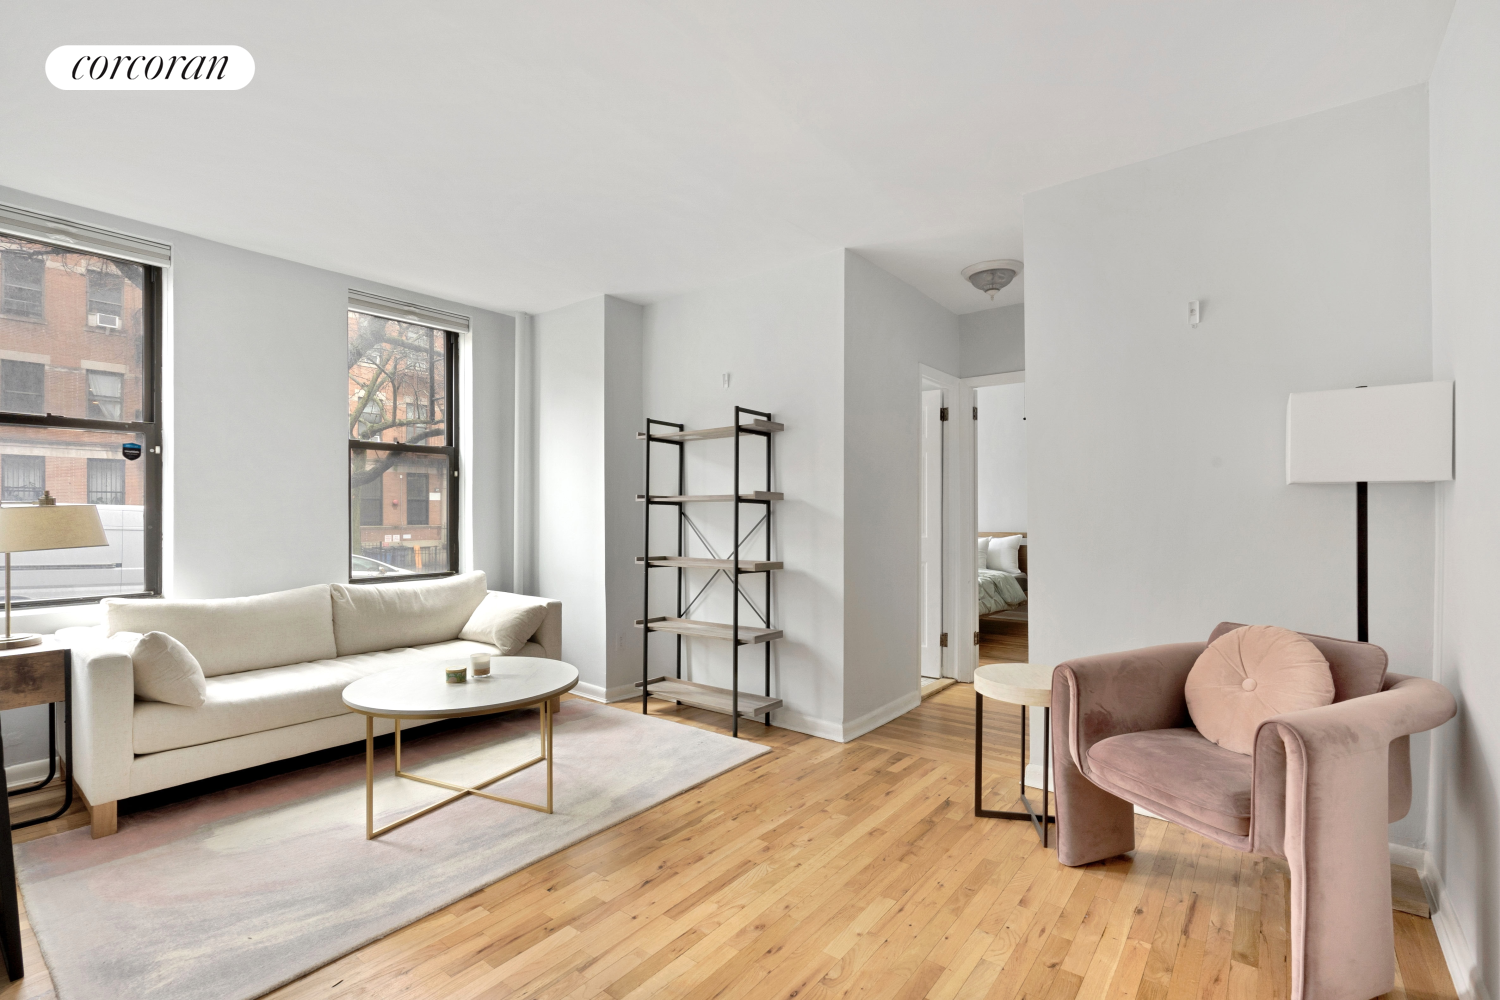 425 Prospect Place 1D, Crown Heights, Brooklyn, New York - 1 Bedrooms  
1 Bathrooms  
3 Rooms - 